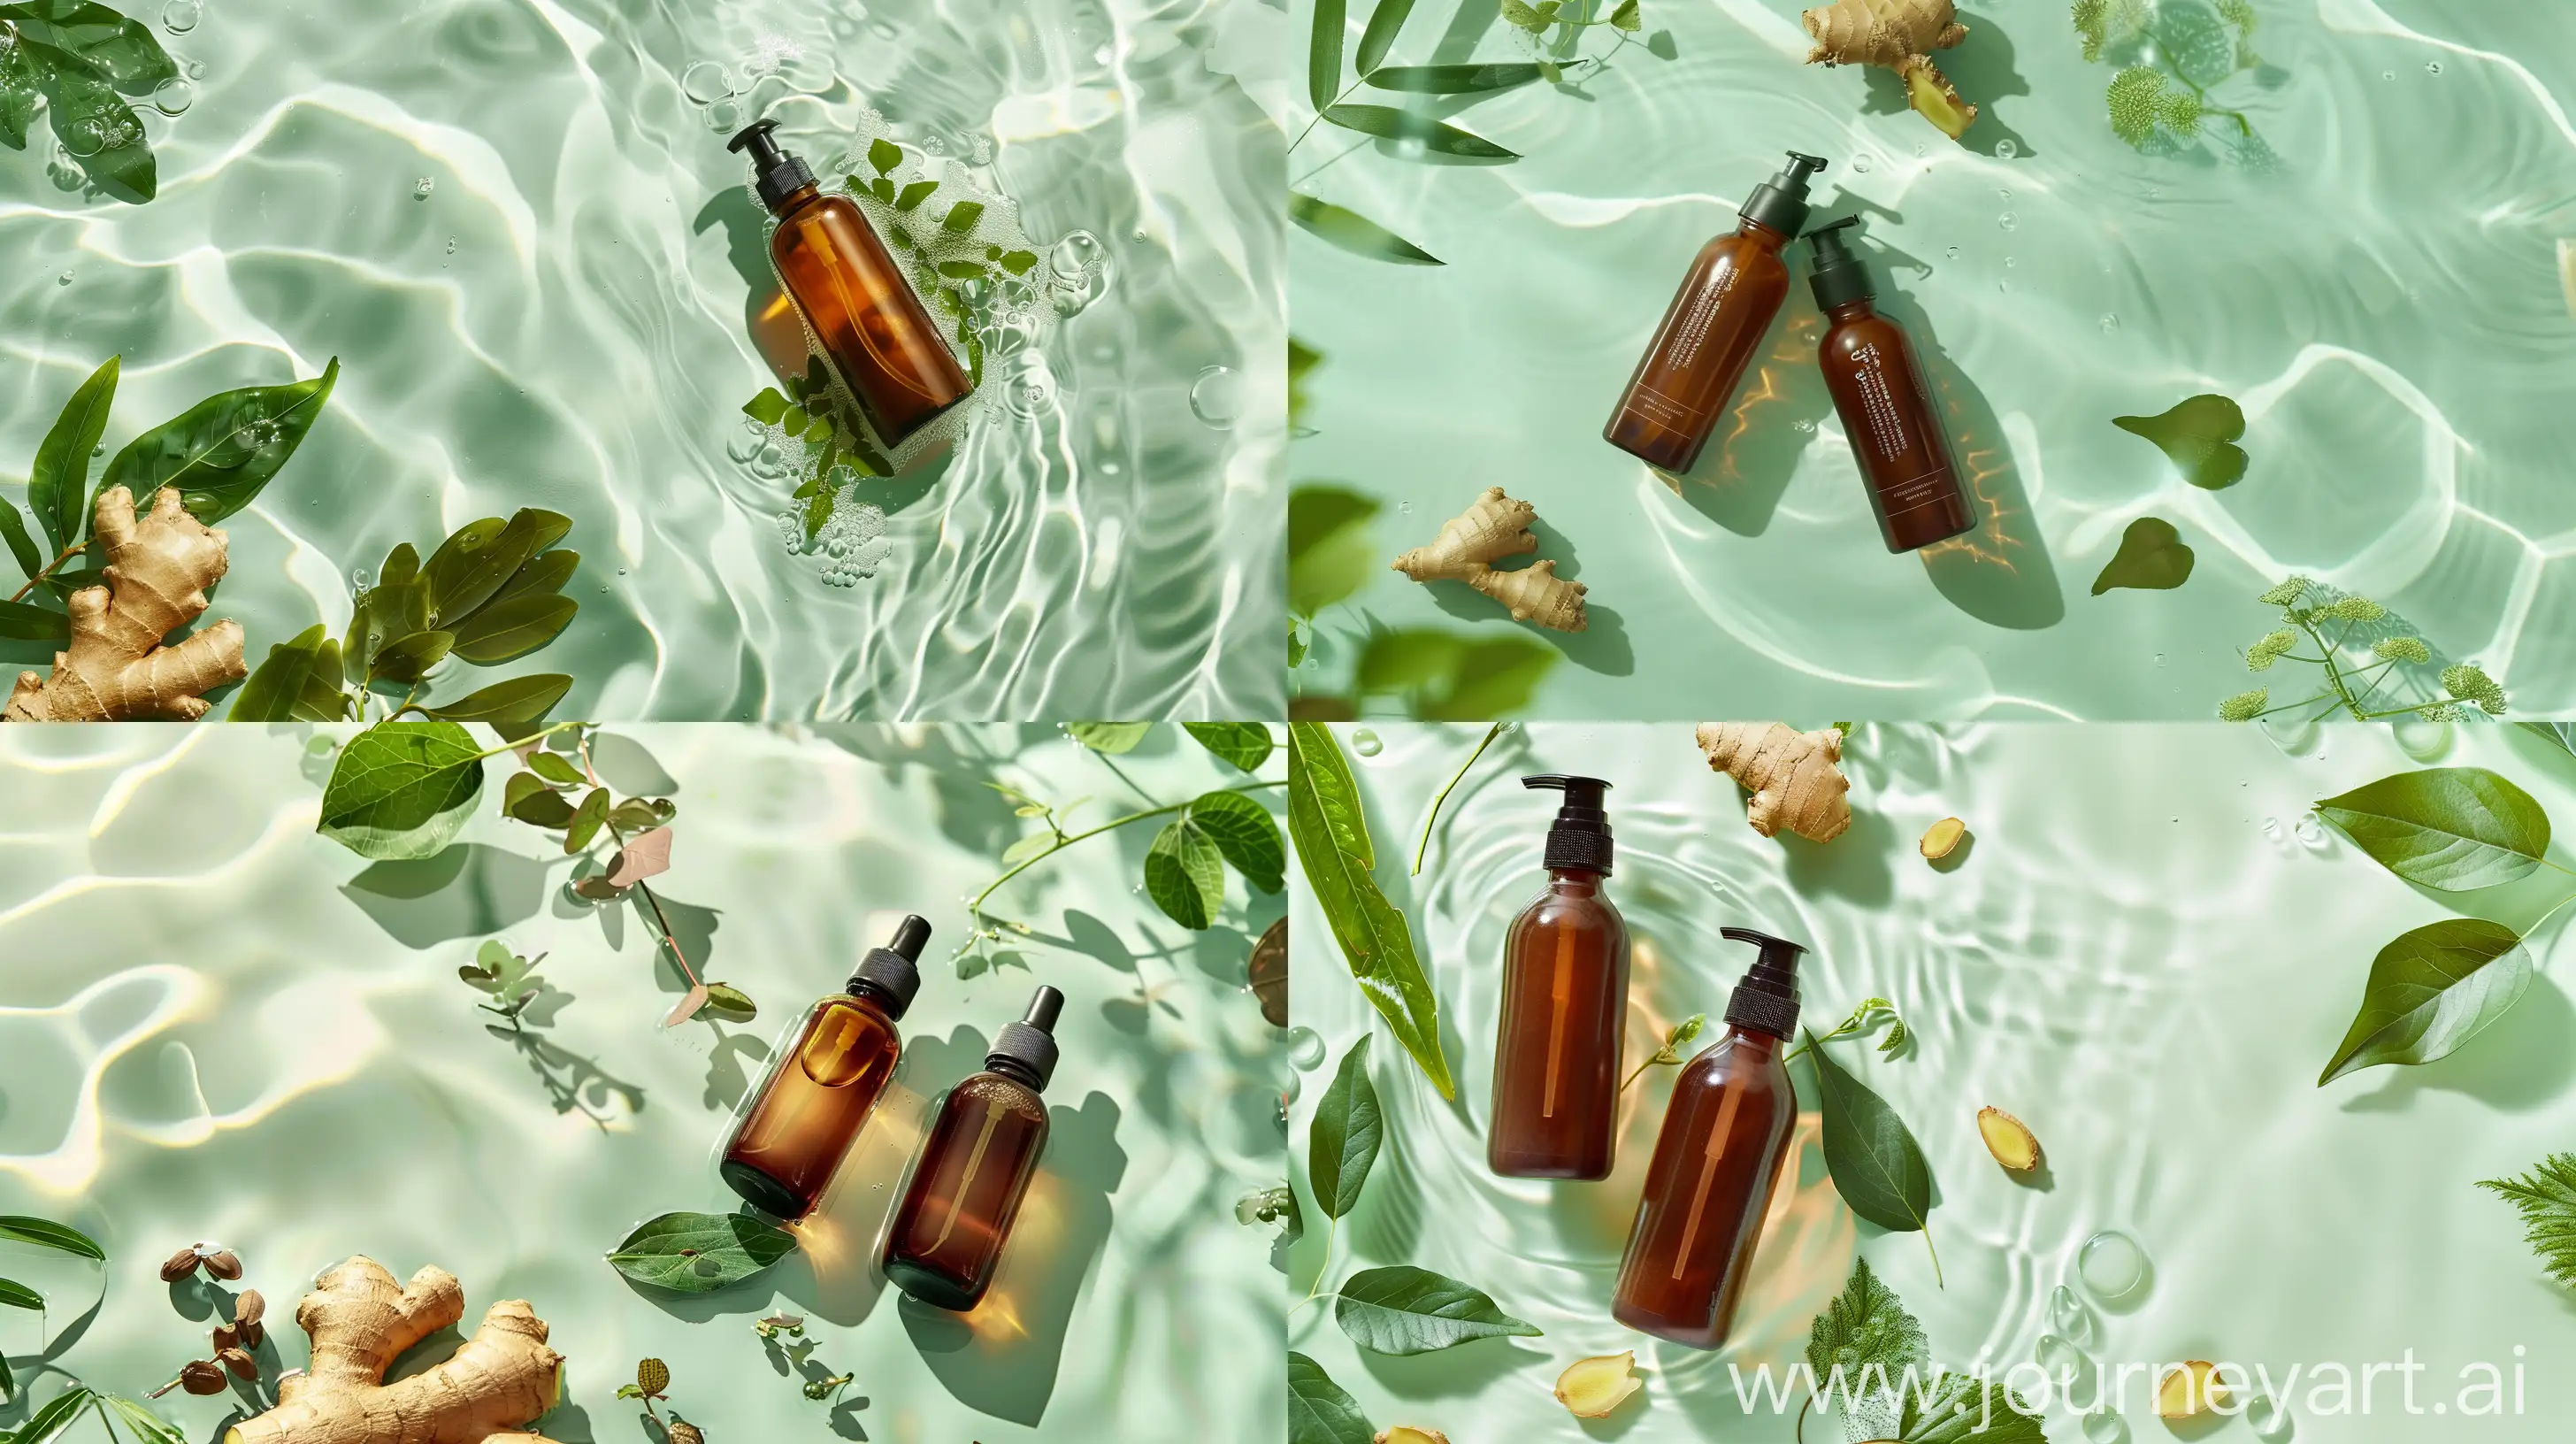 Product: two 2 bottles of brown shampoo cosmetic bottles on the left image. Background: cosmetic bottle lying on the surface of light green water Factors: Soft focus, A little ginger, perilla leaves, polygonum, and mistletoe float on the water surface around the product, Elegant light, Reflection on the water surface, The atmosphere is quiet
Style: fresh, natural, quiet --ar 16:9 --style raw